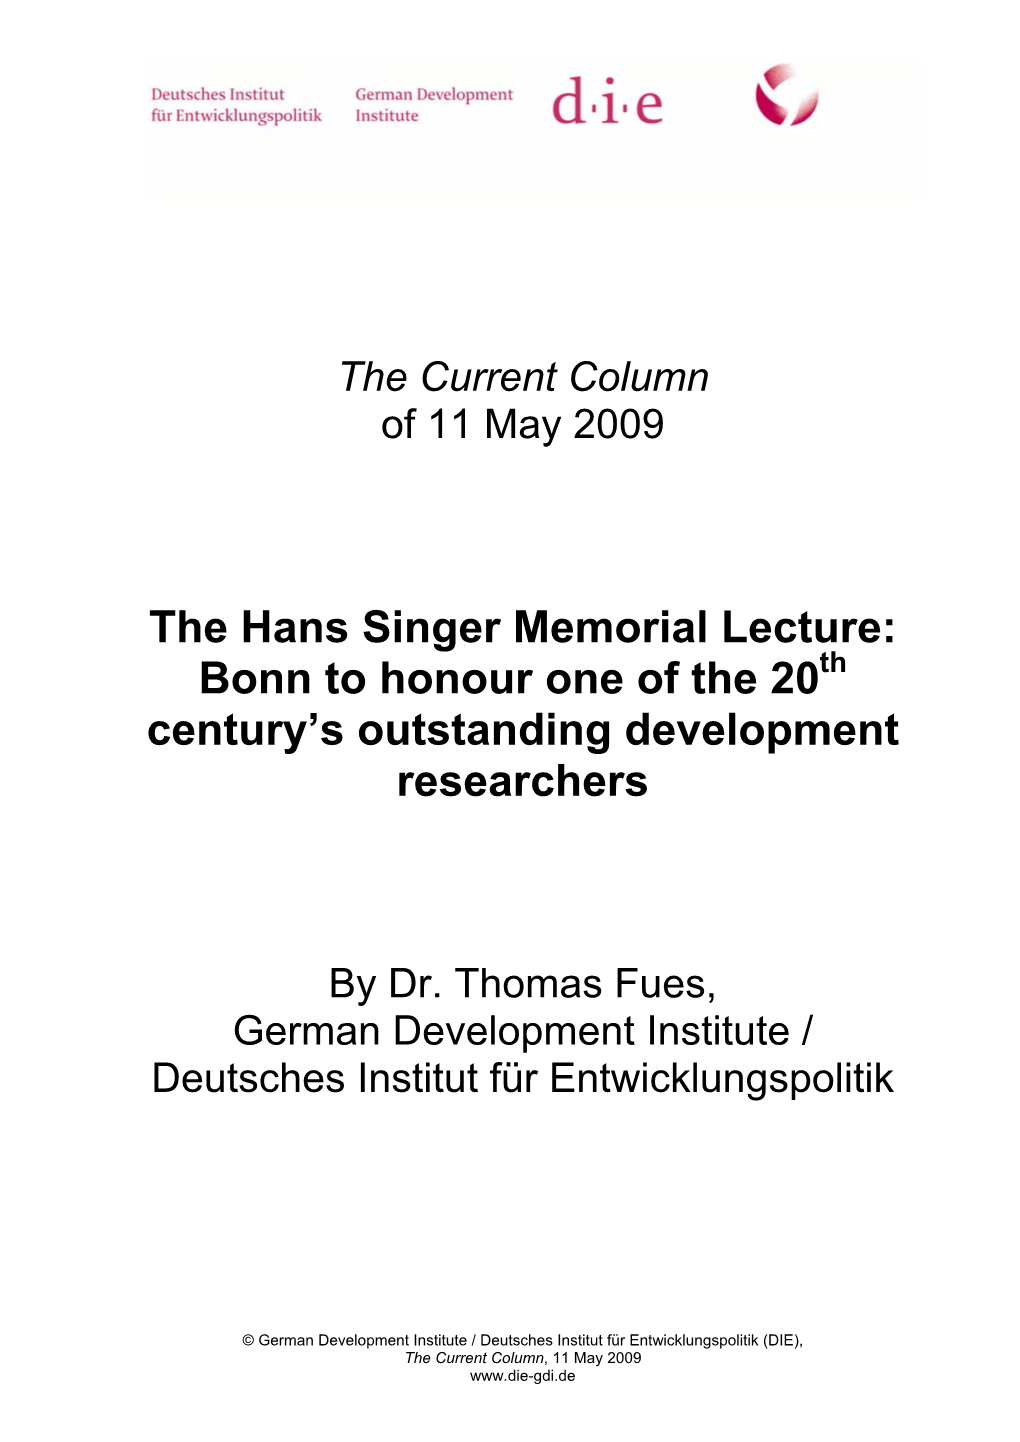 The Hans Singer Memorial Lecture: Bonn to Honour One of the 20Th Century’S Outstanding Development Researchers